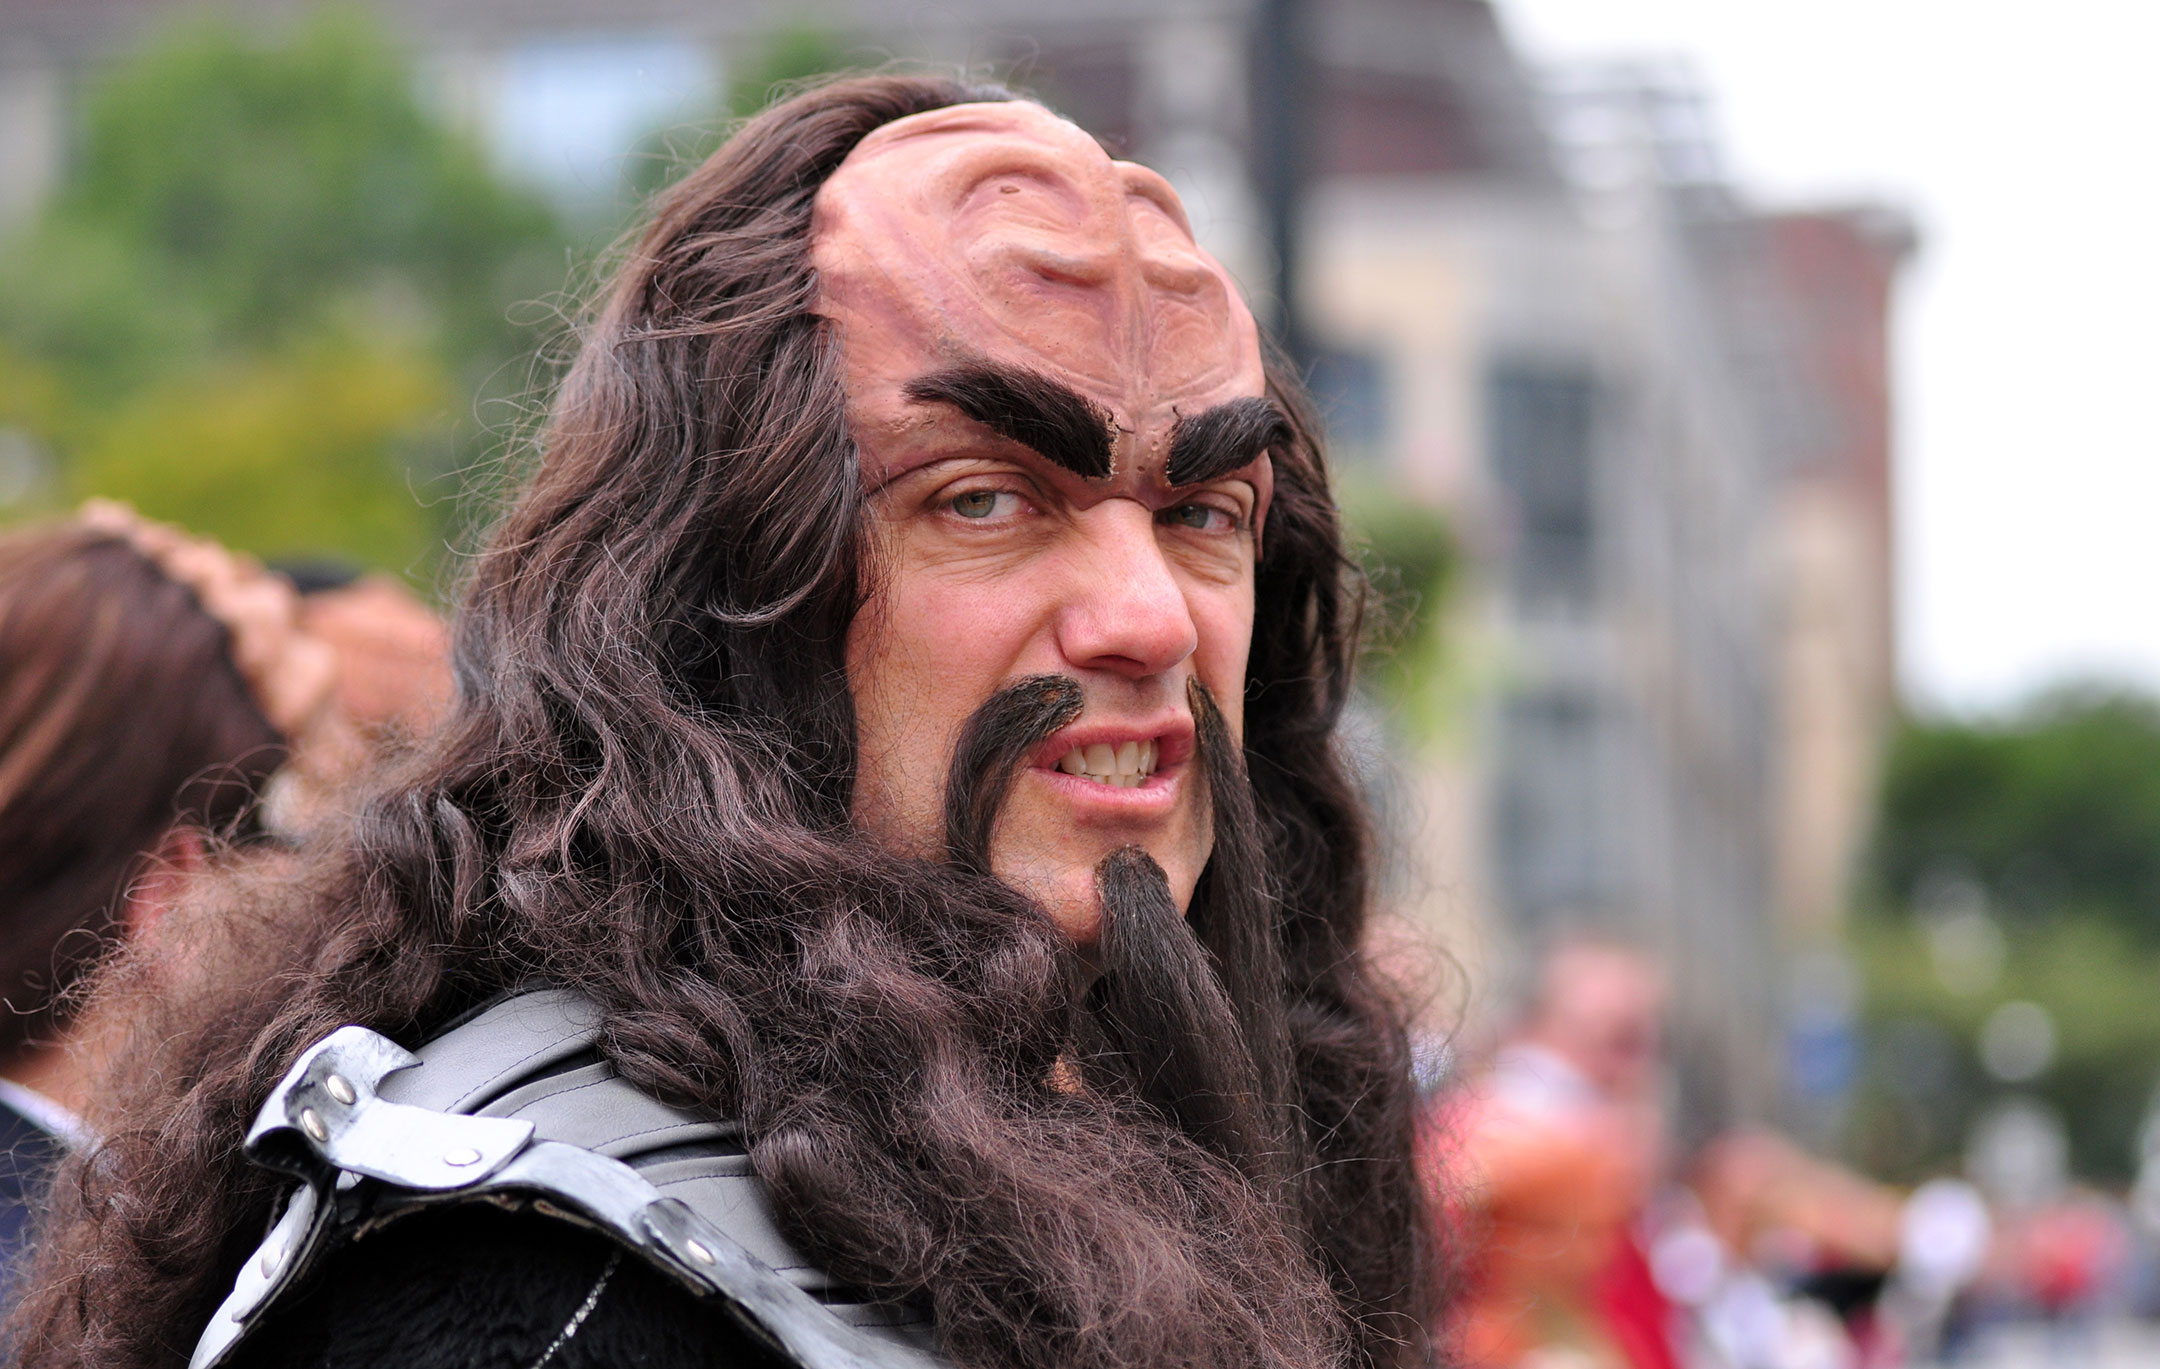 Man dressed up as a Klingon sneering at the camera